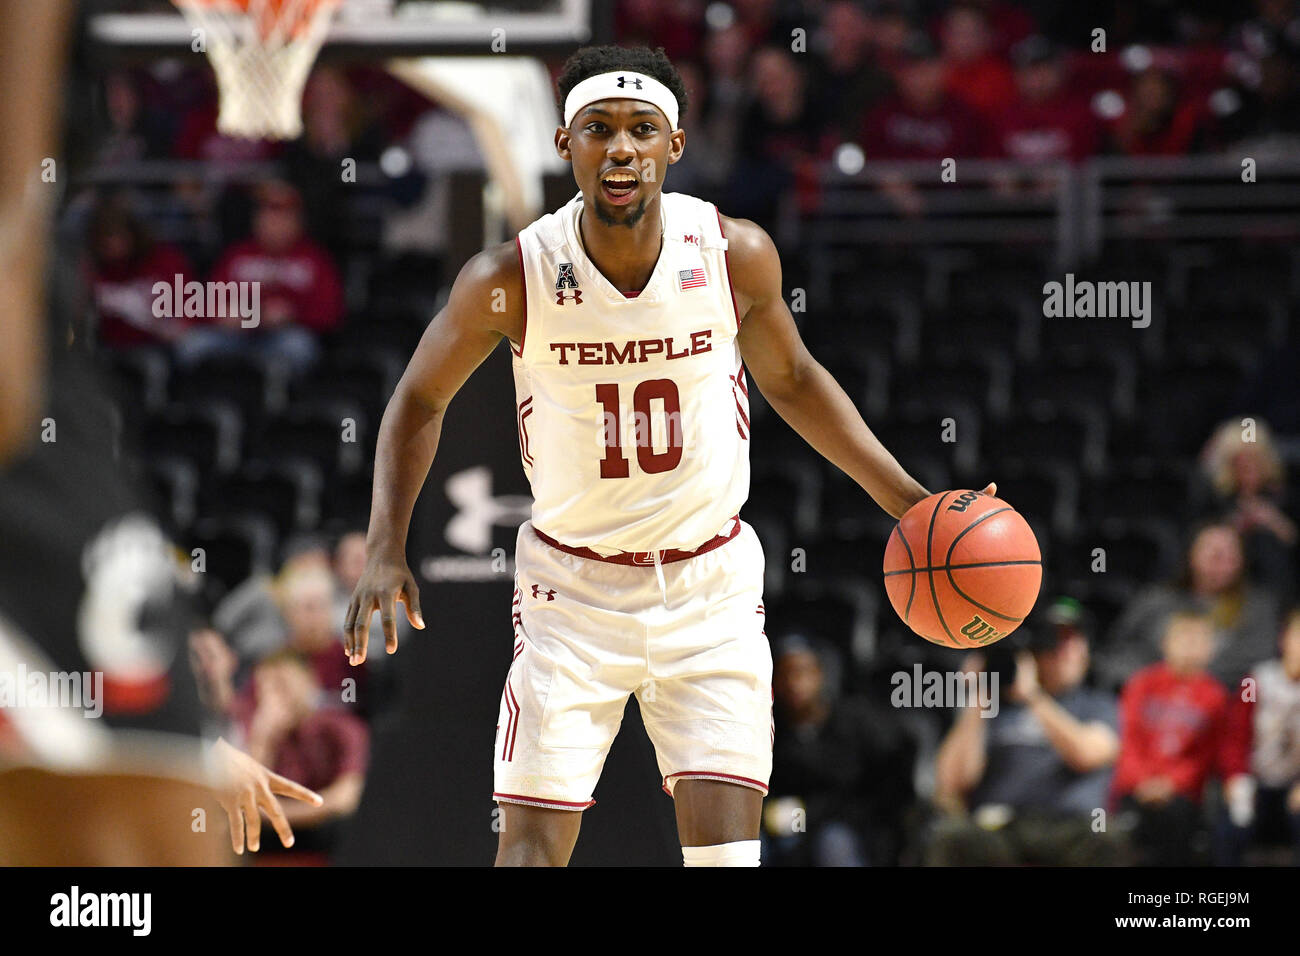 Philadelphia, Pennsylvania, USA. 27th Jan, 2019. Temple Owls guard SHIZZ ALSTON JR. (10) sets the offense during the American Athletic Conference basketball game played at the Liacouras Center in Philadelphia. Cincinnati cane from behind to beat Temple 72-68. Credit: Ken Inness/ZUMA Wire/Alamy Live News Stock Photo